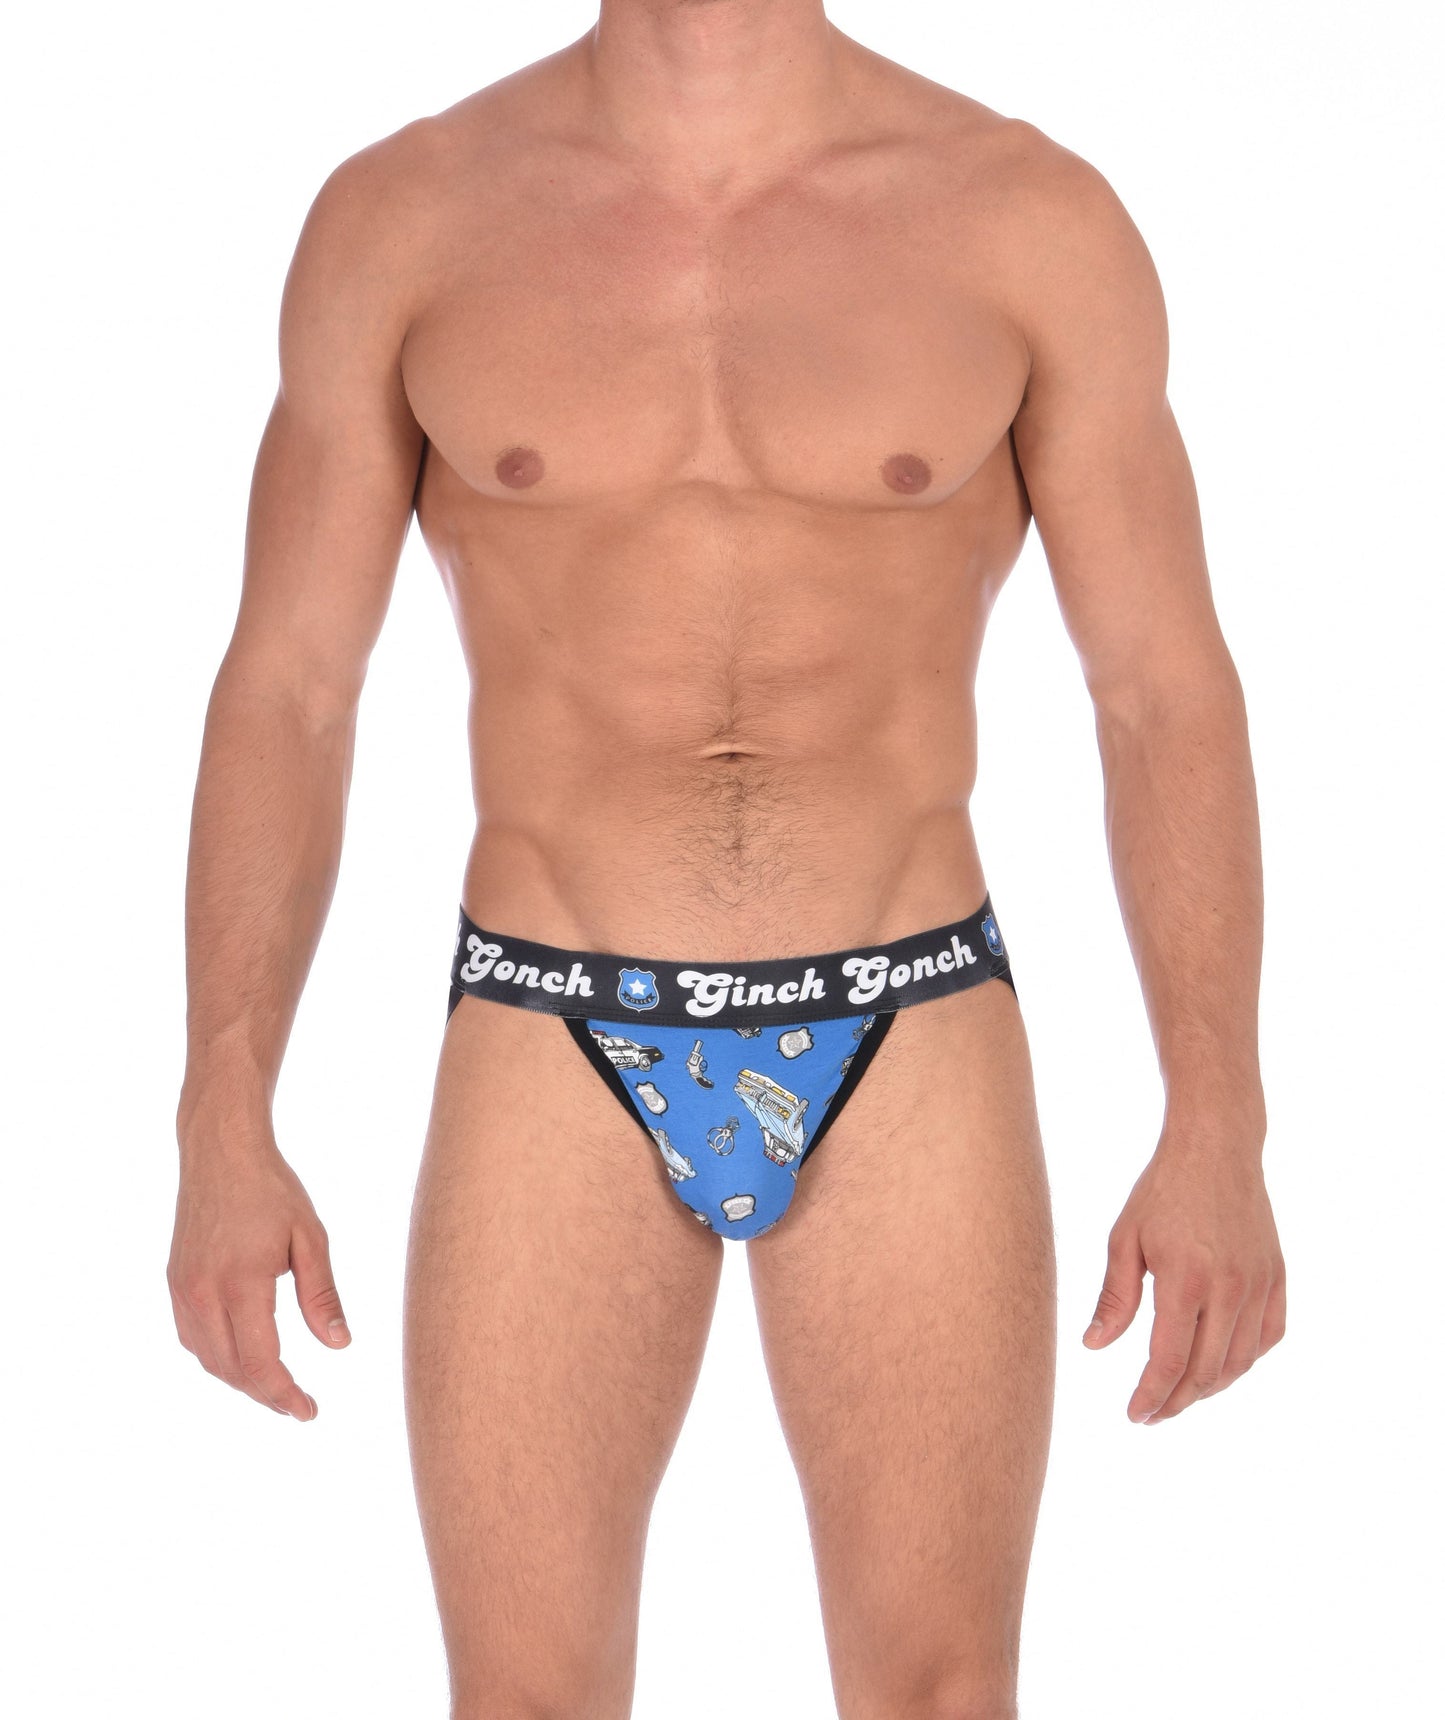 Ginch Gonch GG Patrol jock strap men's underwear blue fabric with cop cars, badges, hand cuffs, and guns. Black trim and black printed waistband front.